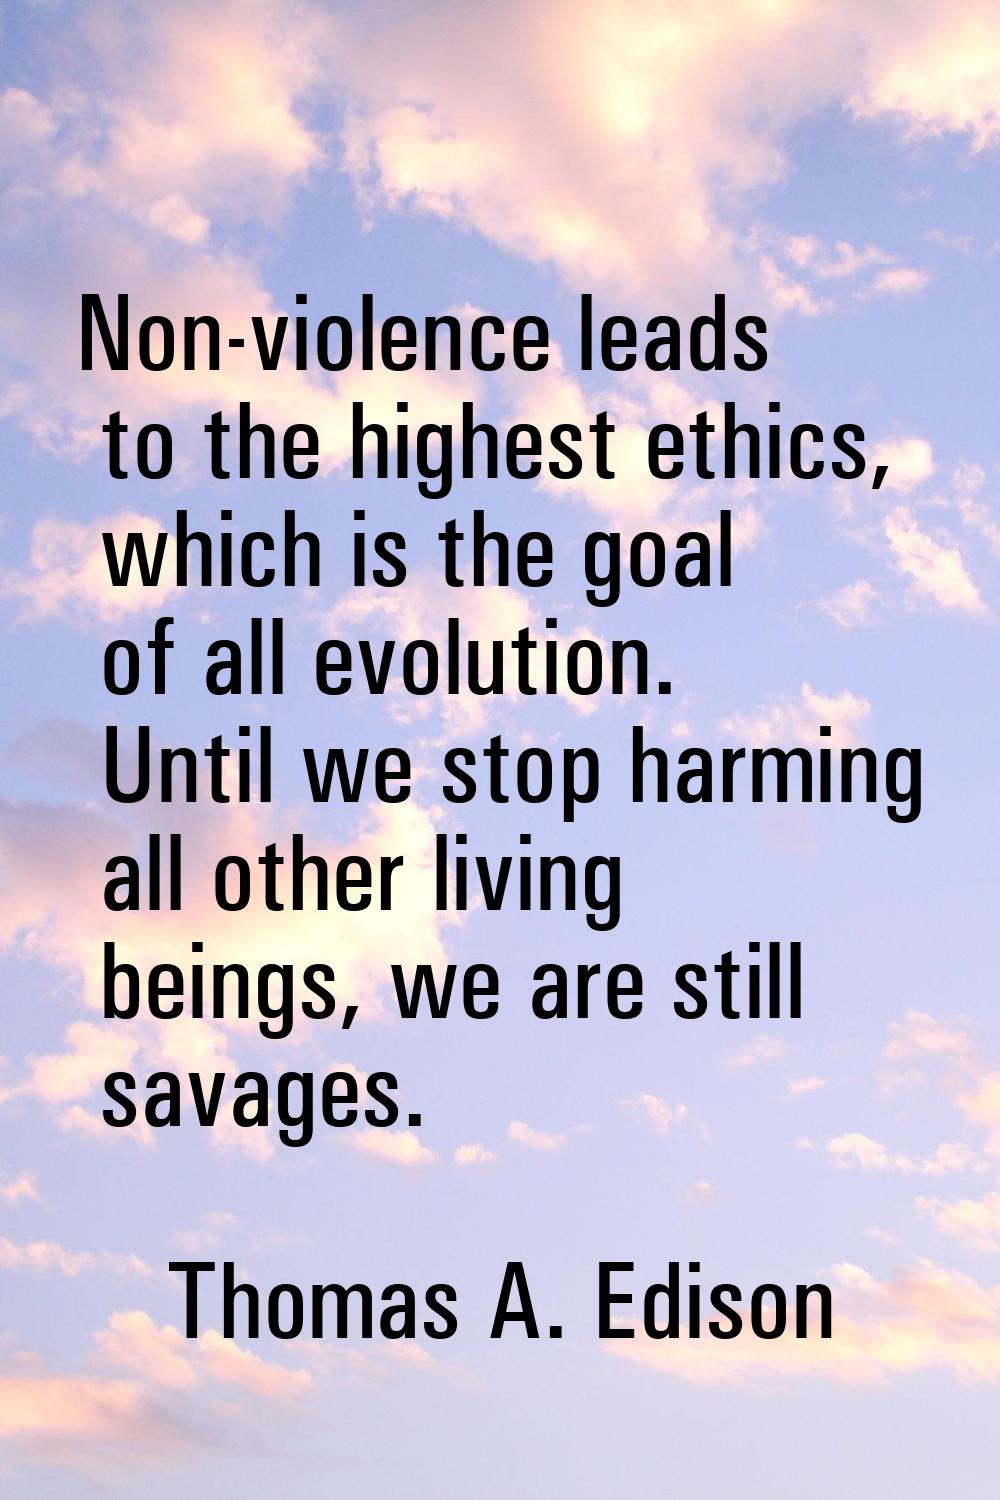 Non-violence leads to the highest ethics, which is the goal of all evolution. Until we stop harming